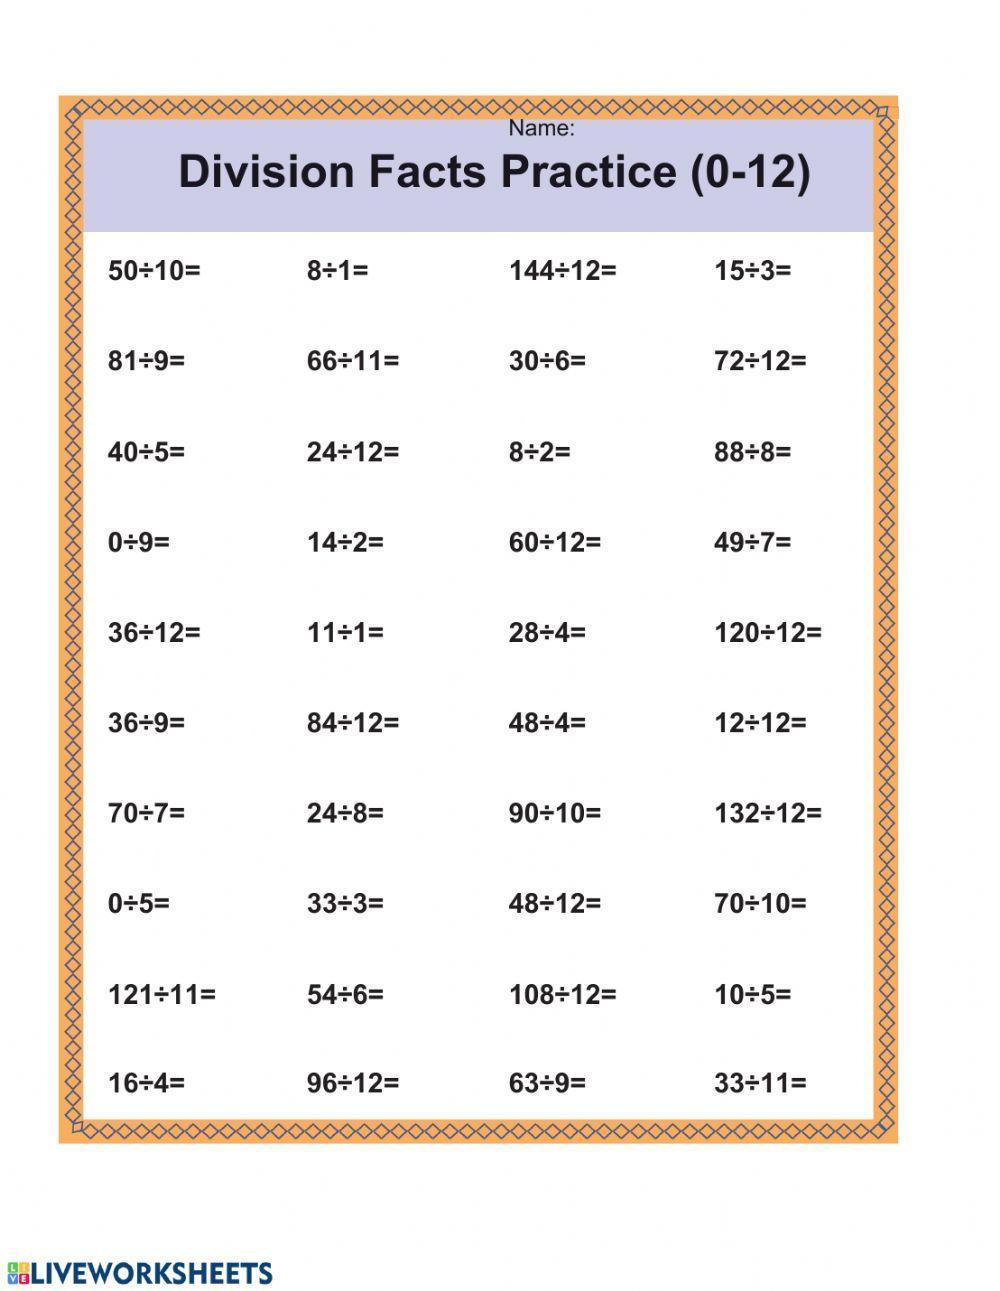 Division Facts 0-12